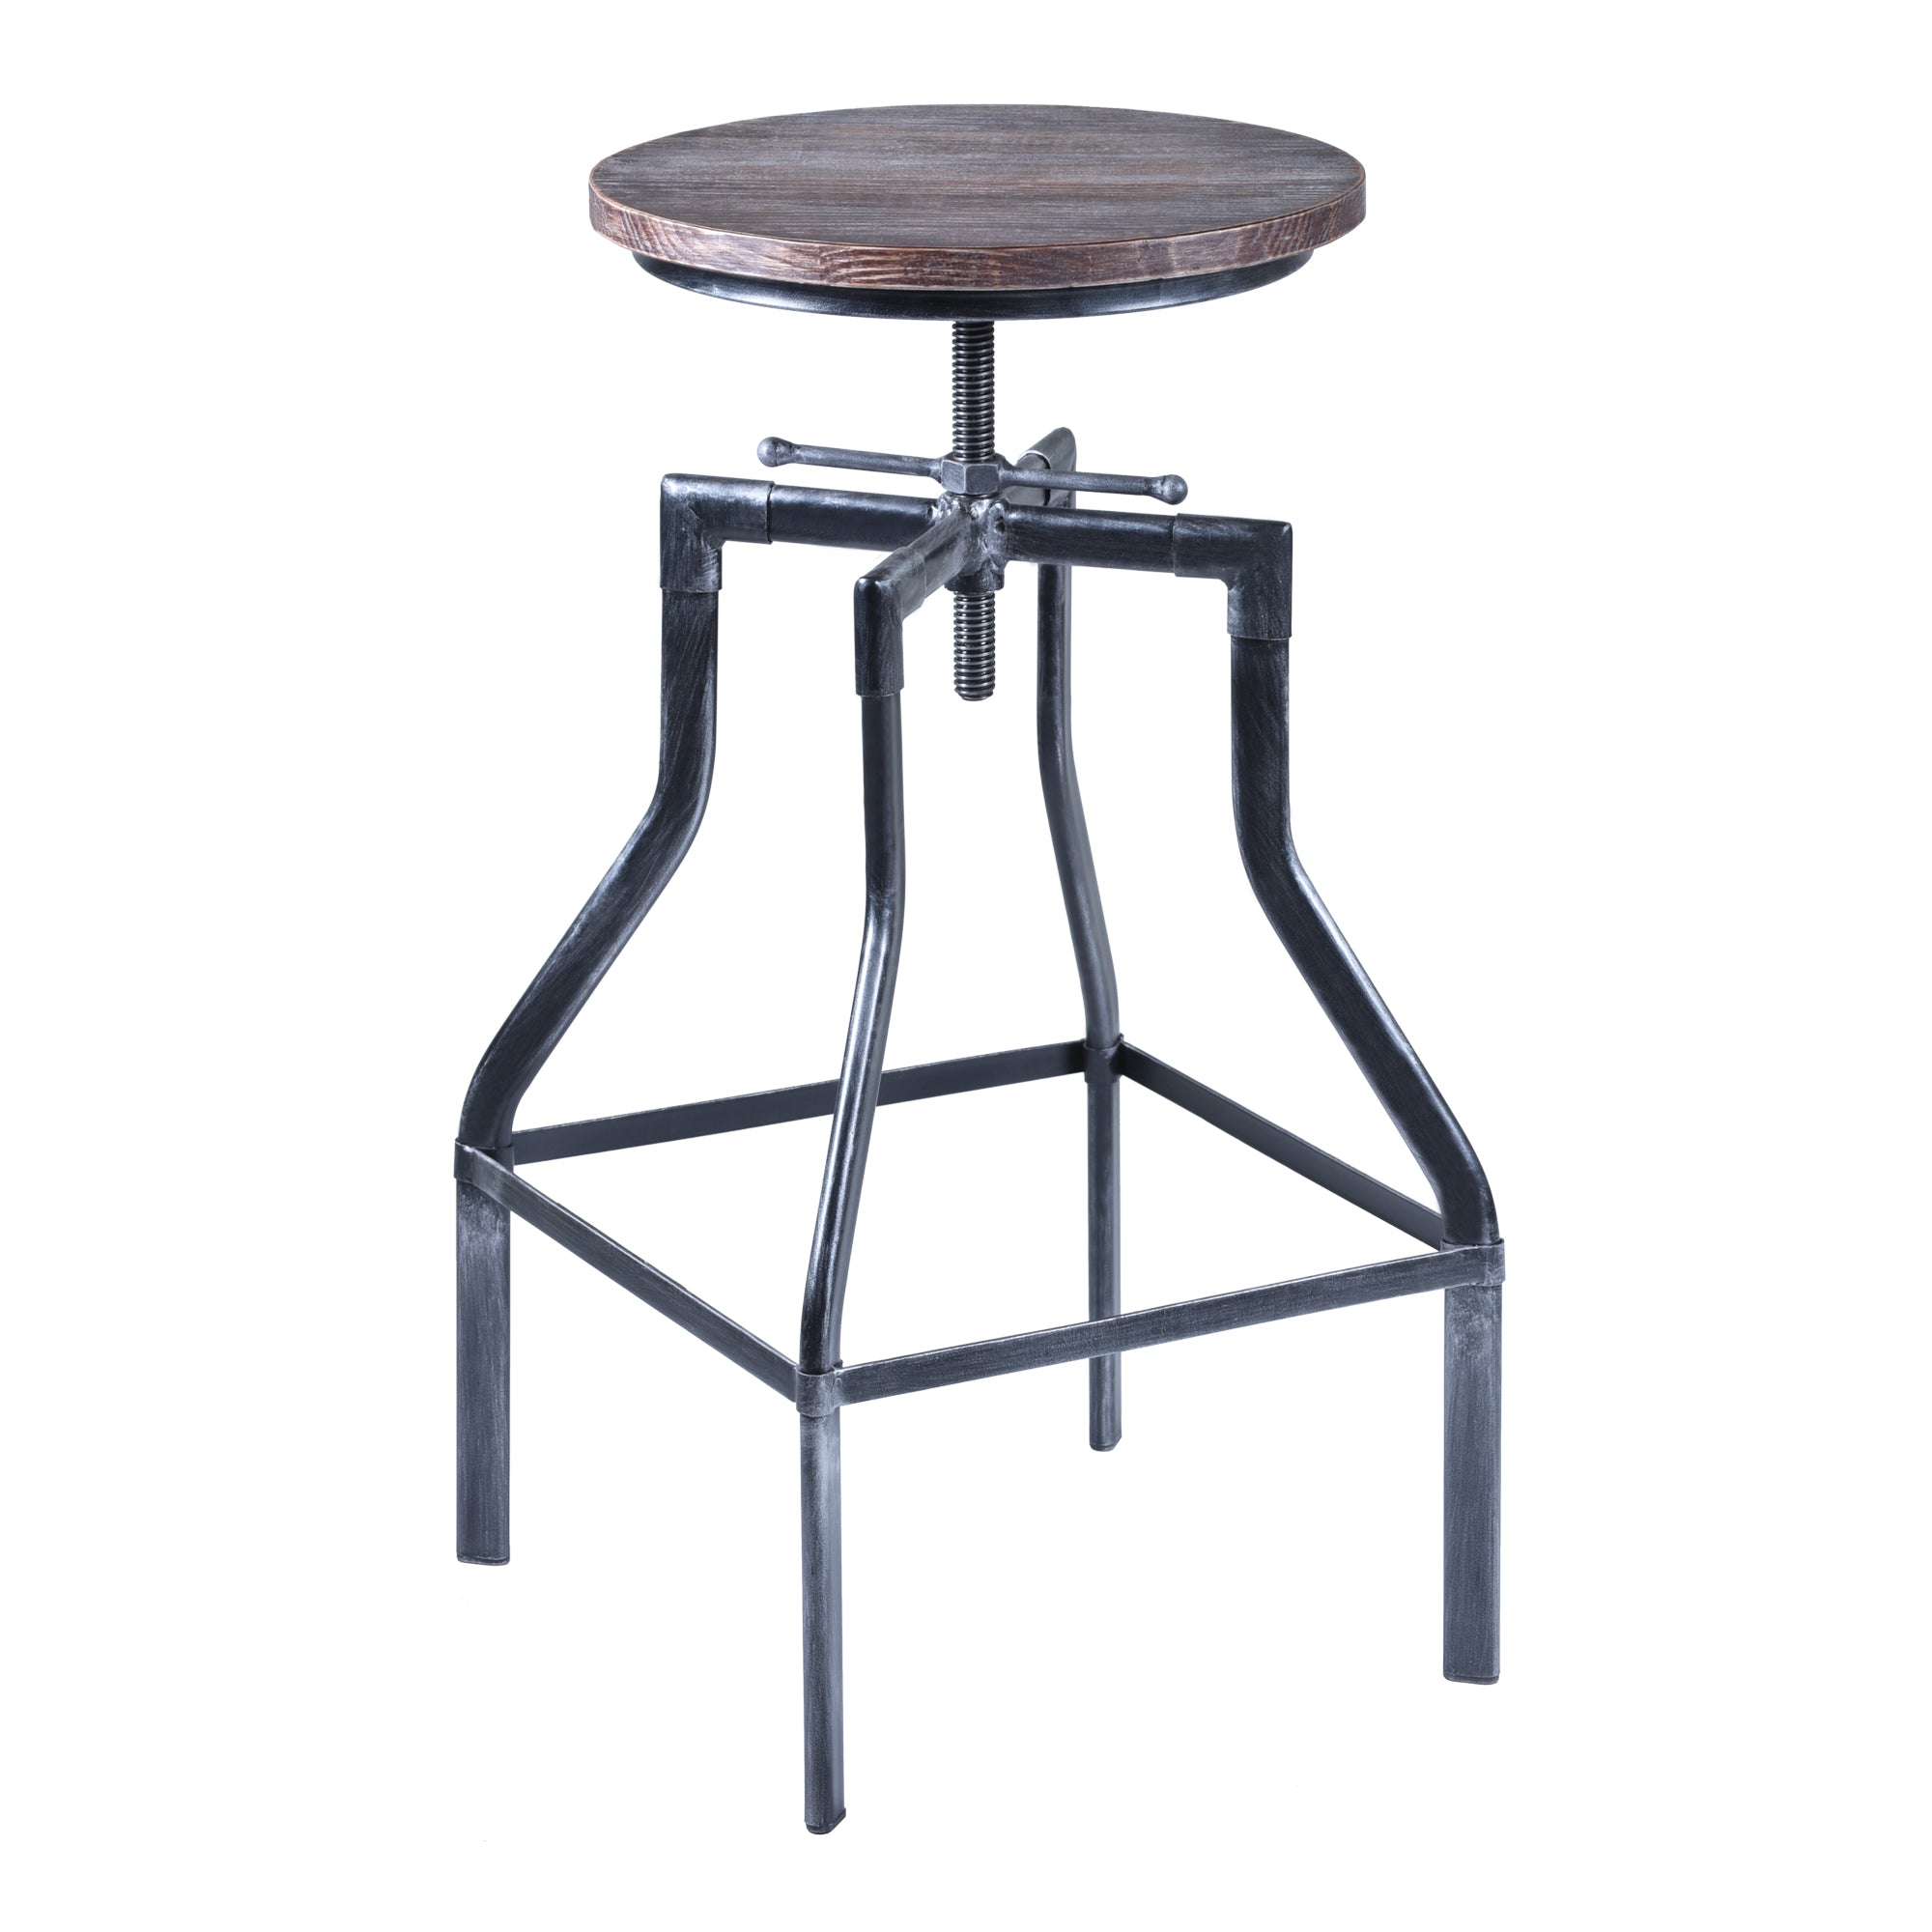 Armen Living Lccostsbpi Concord Adjustable Swivel Barstool In Industrial Grey Finish With Ash Pine Wood Seat